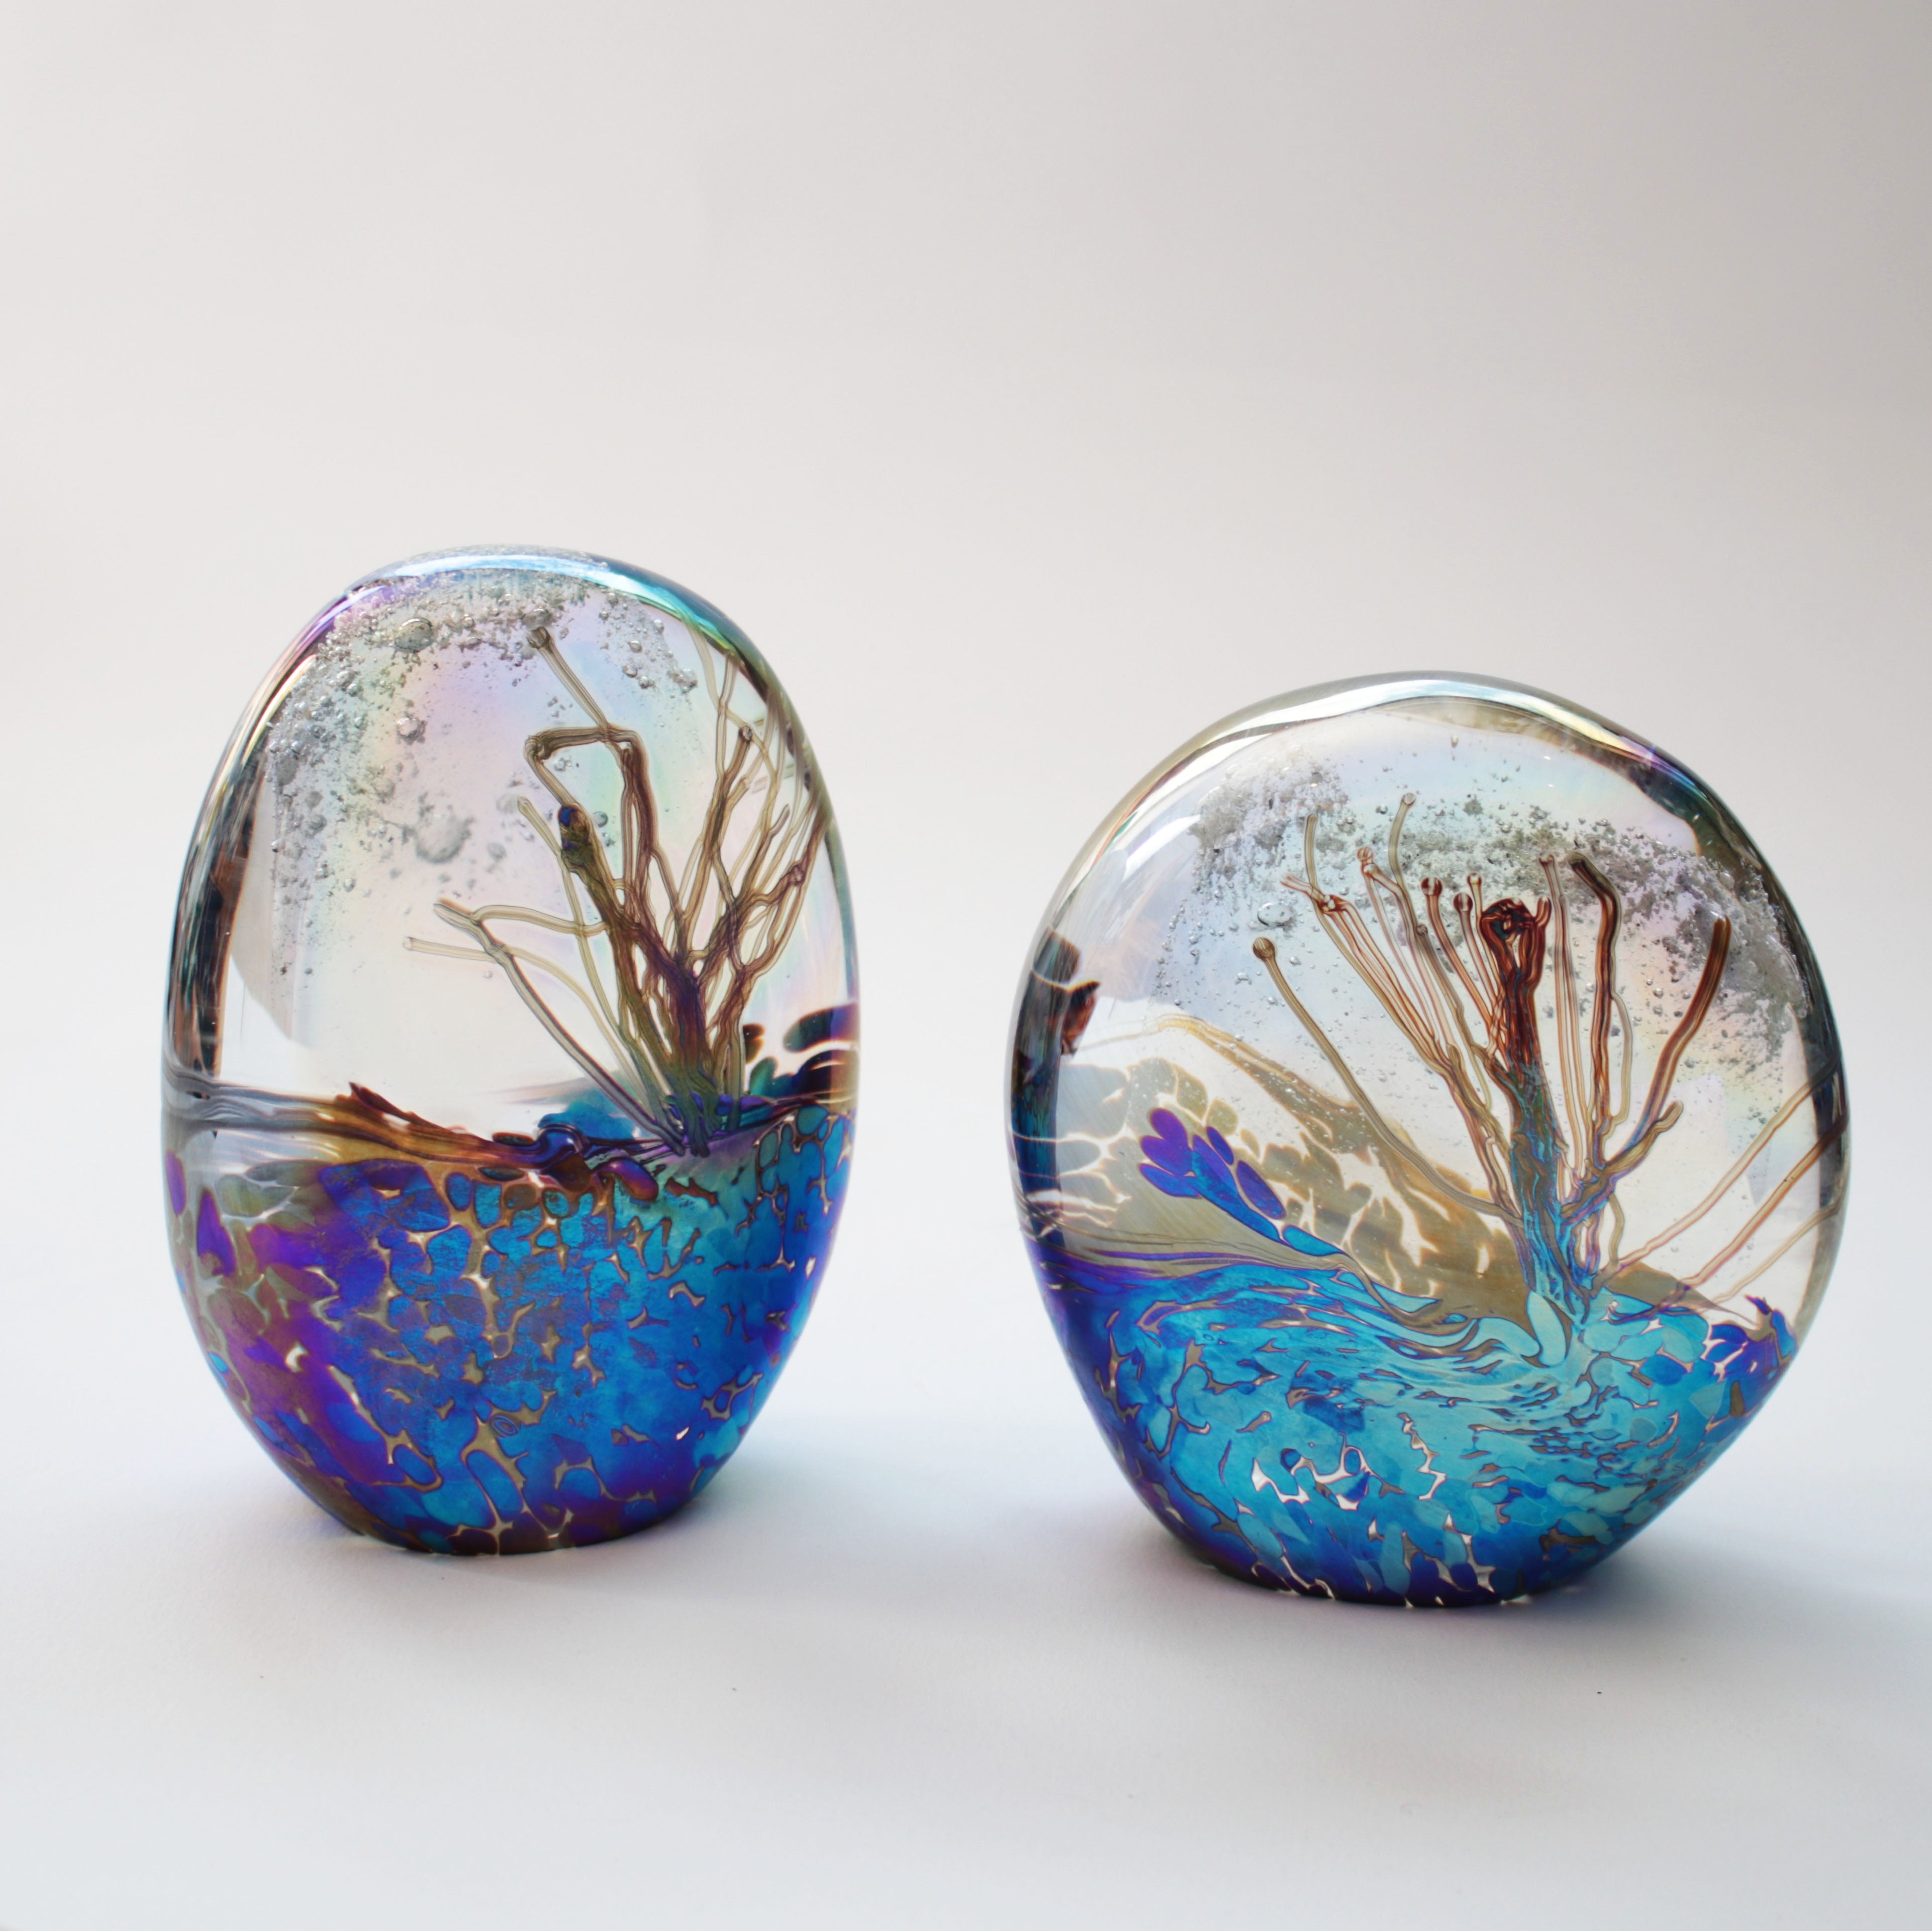 These paperweights capture a landscape scene.The ashes float in the glass like soft clouds.
Prices from £150